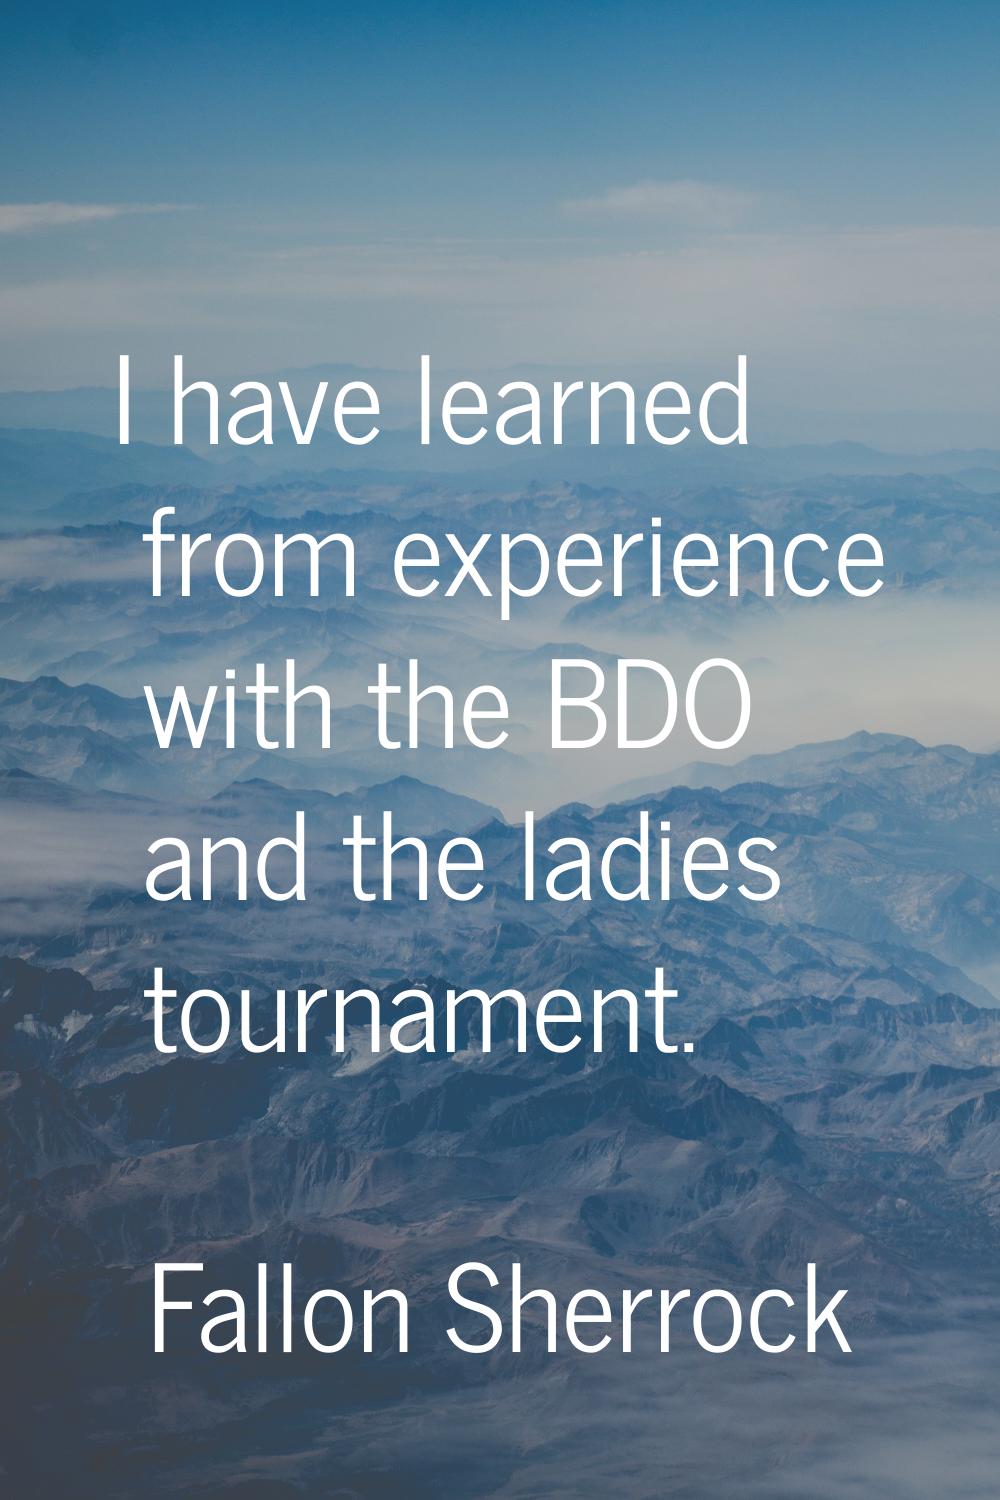 I have learned from experience with the BDO and the ladies tournament.